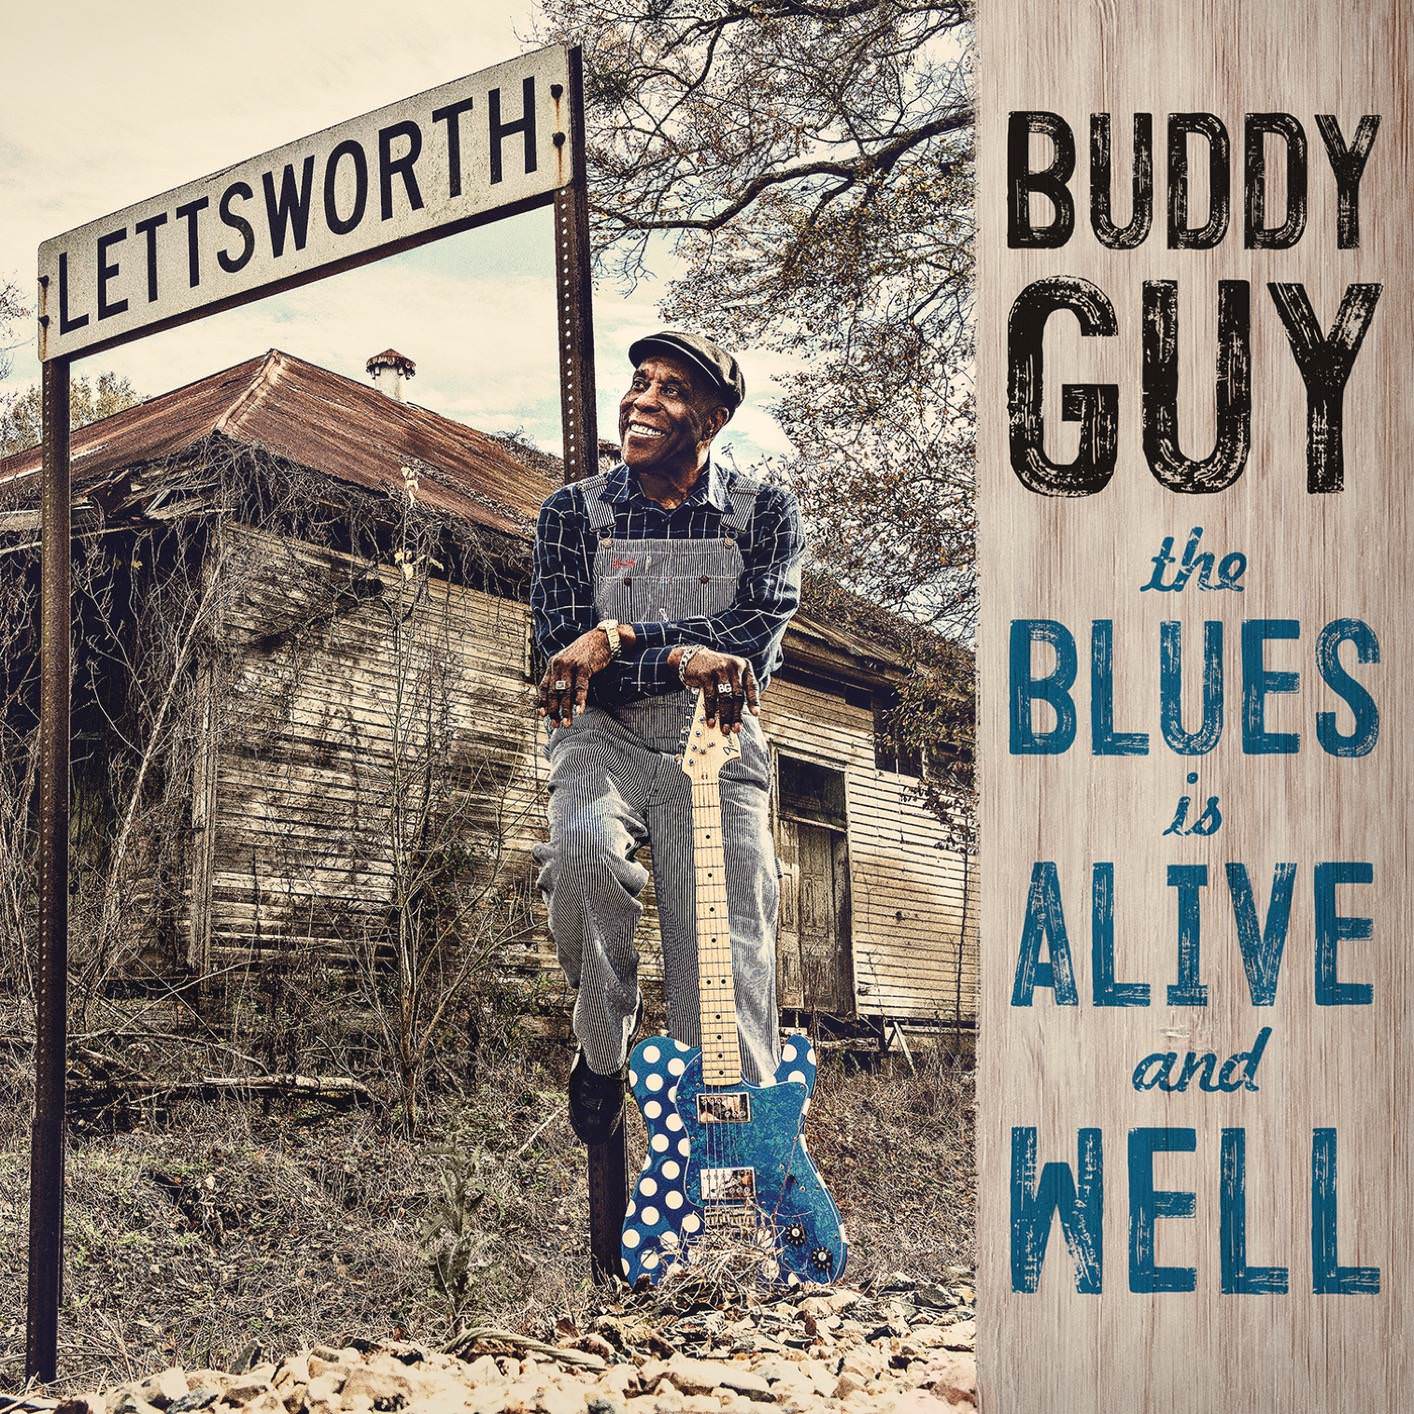 Buddy Guy - The Blues Is Alive And Well (2018) [FLAC 24bit/96kHz]